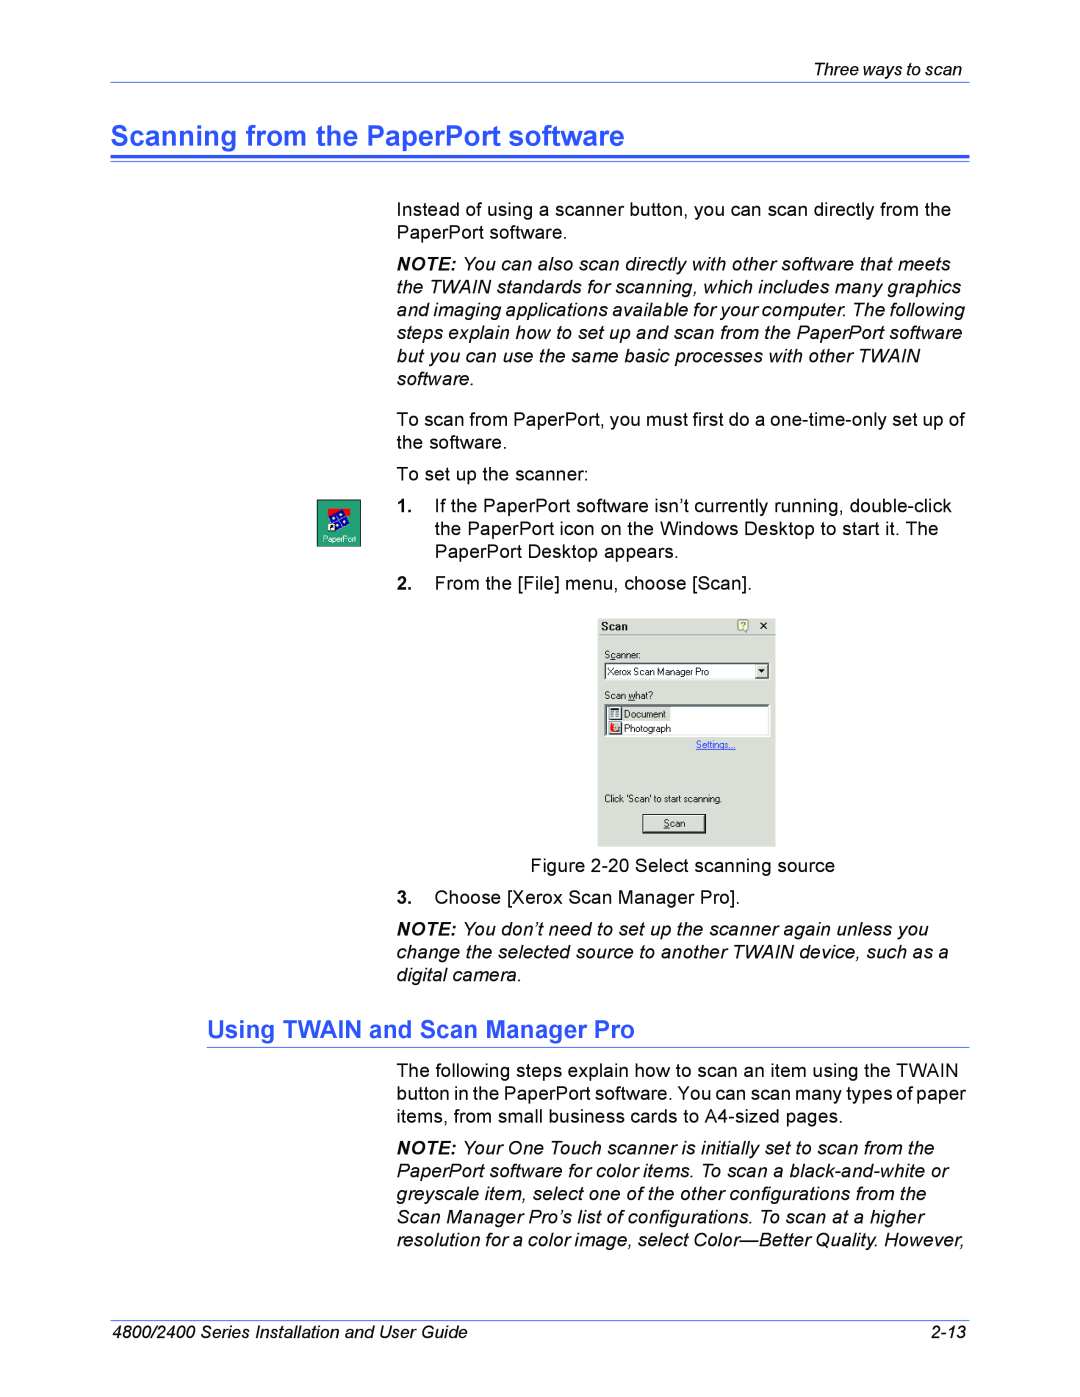 Xerox 2400, 4800 manual Scanning from the PaperPort software, Using TWAIN and Scan Manager Pro 